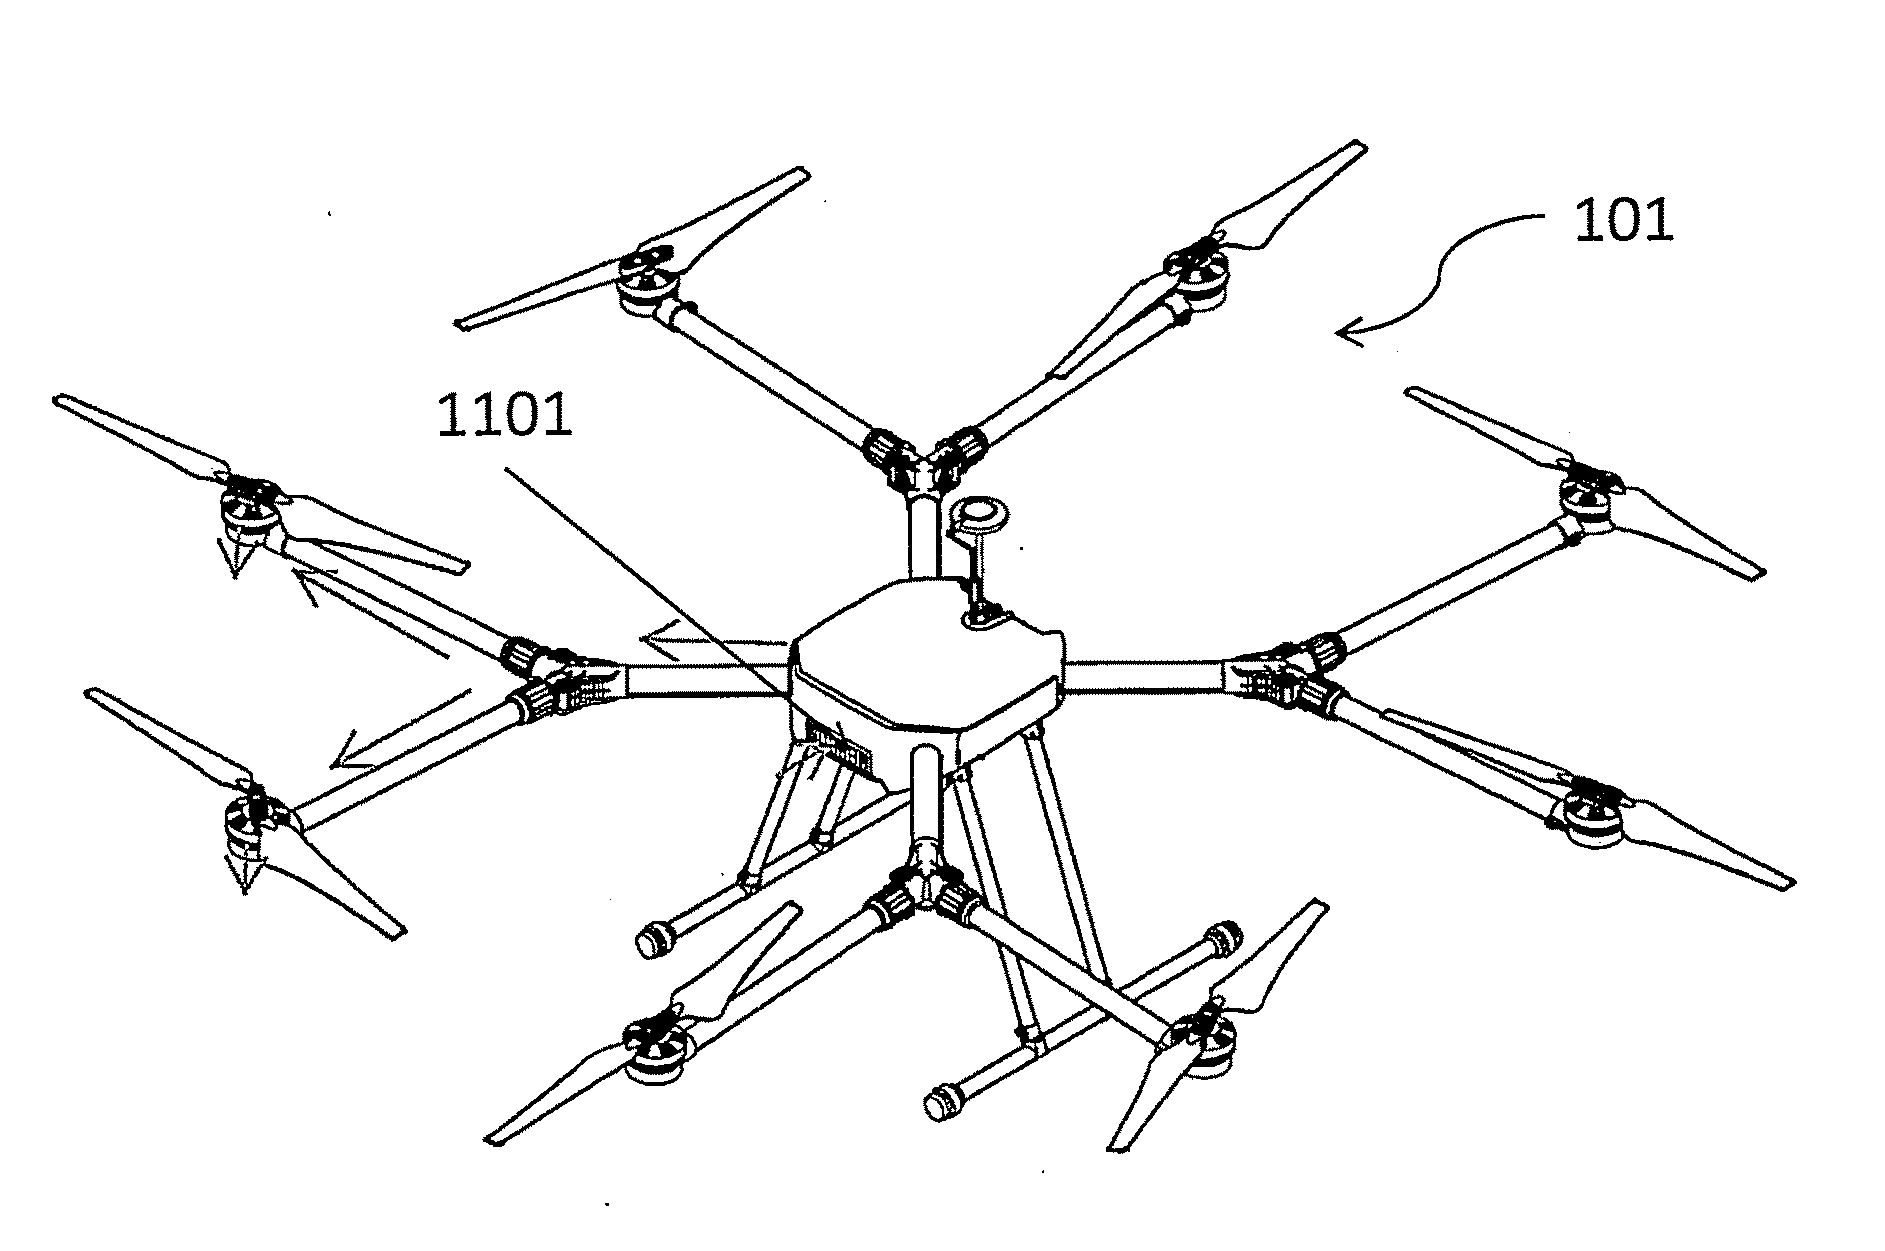 Systems and methods for foldable arms